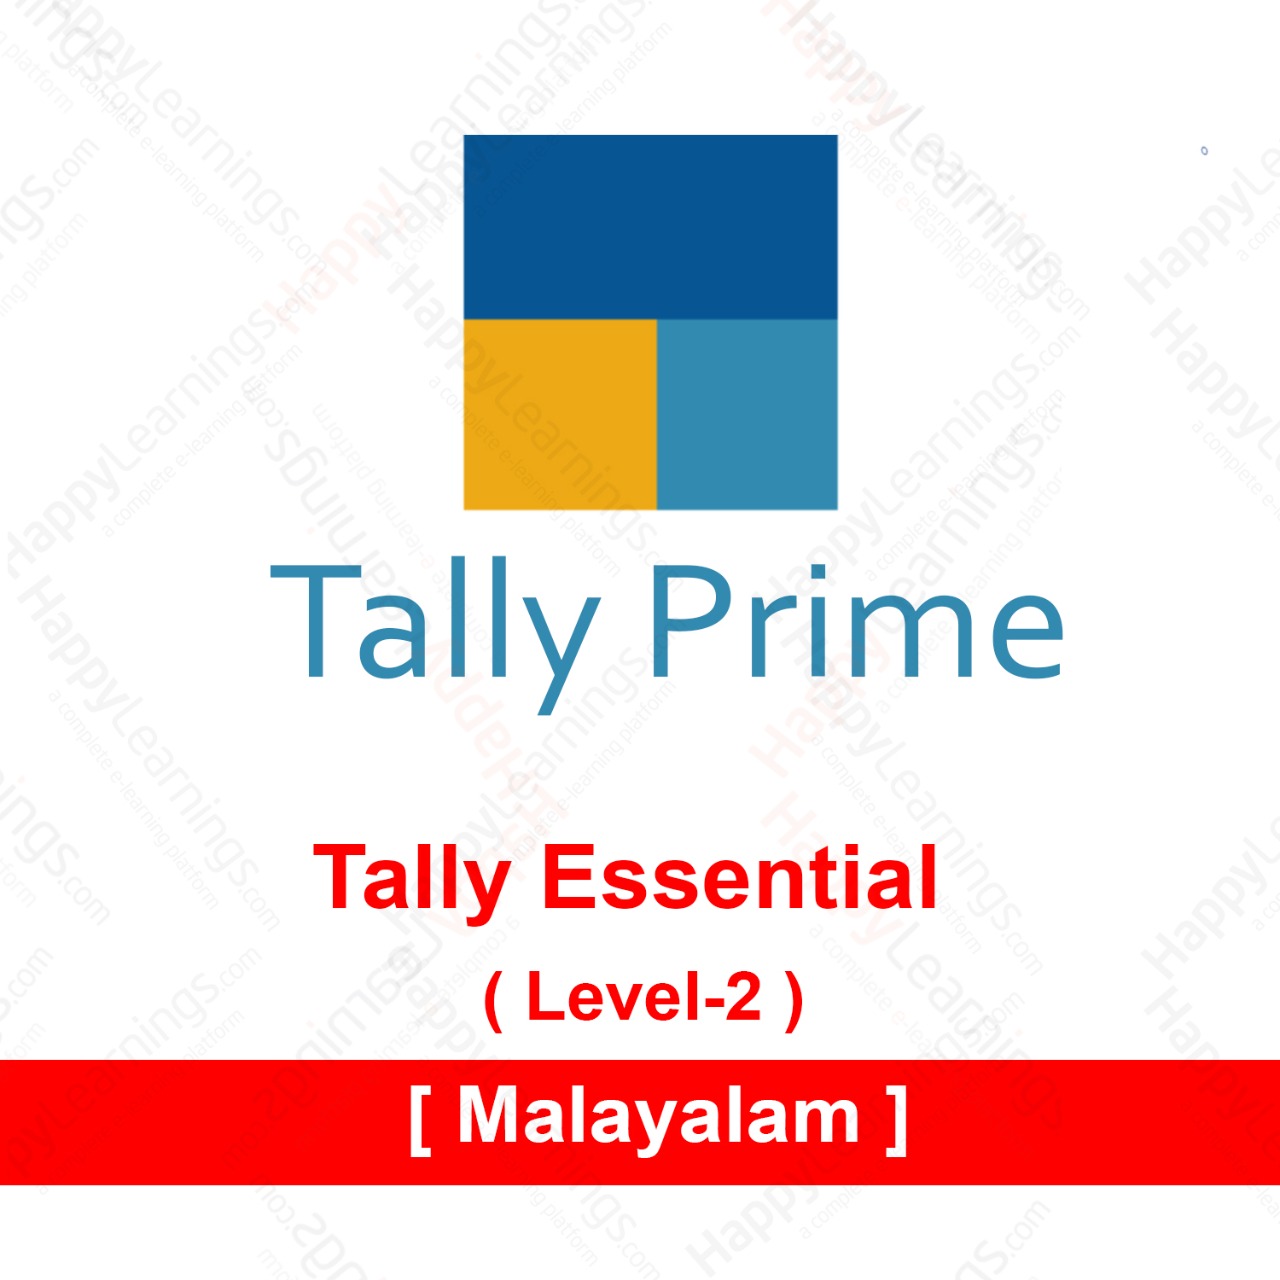 Tally Prime Essential Level -2